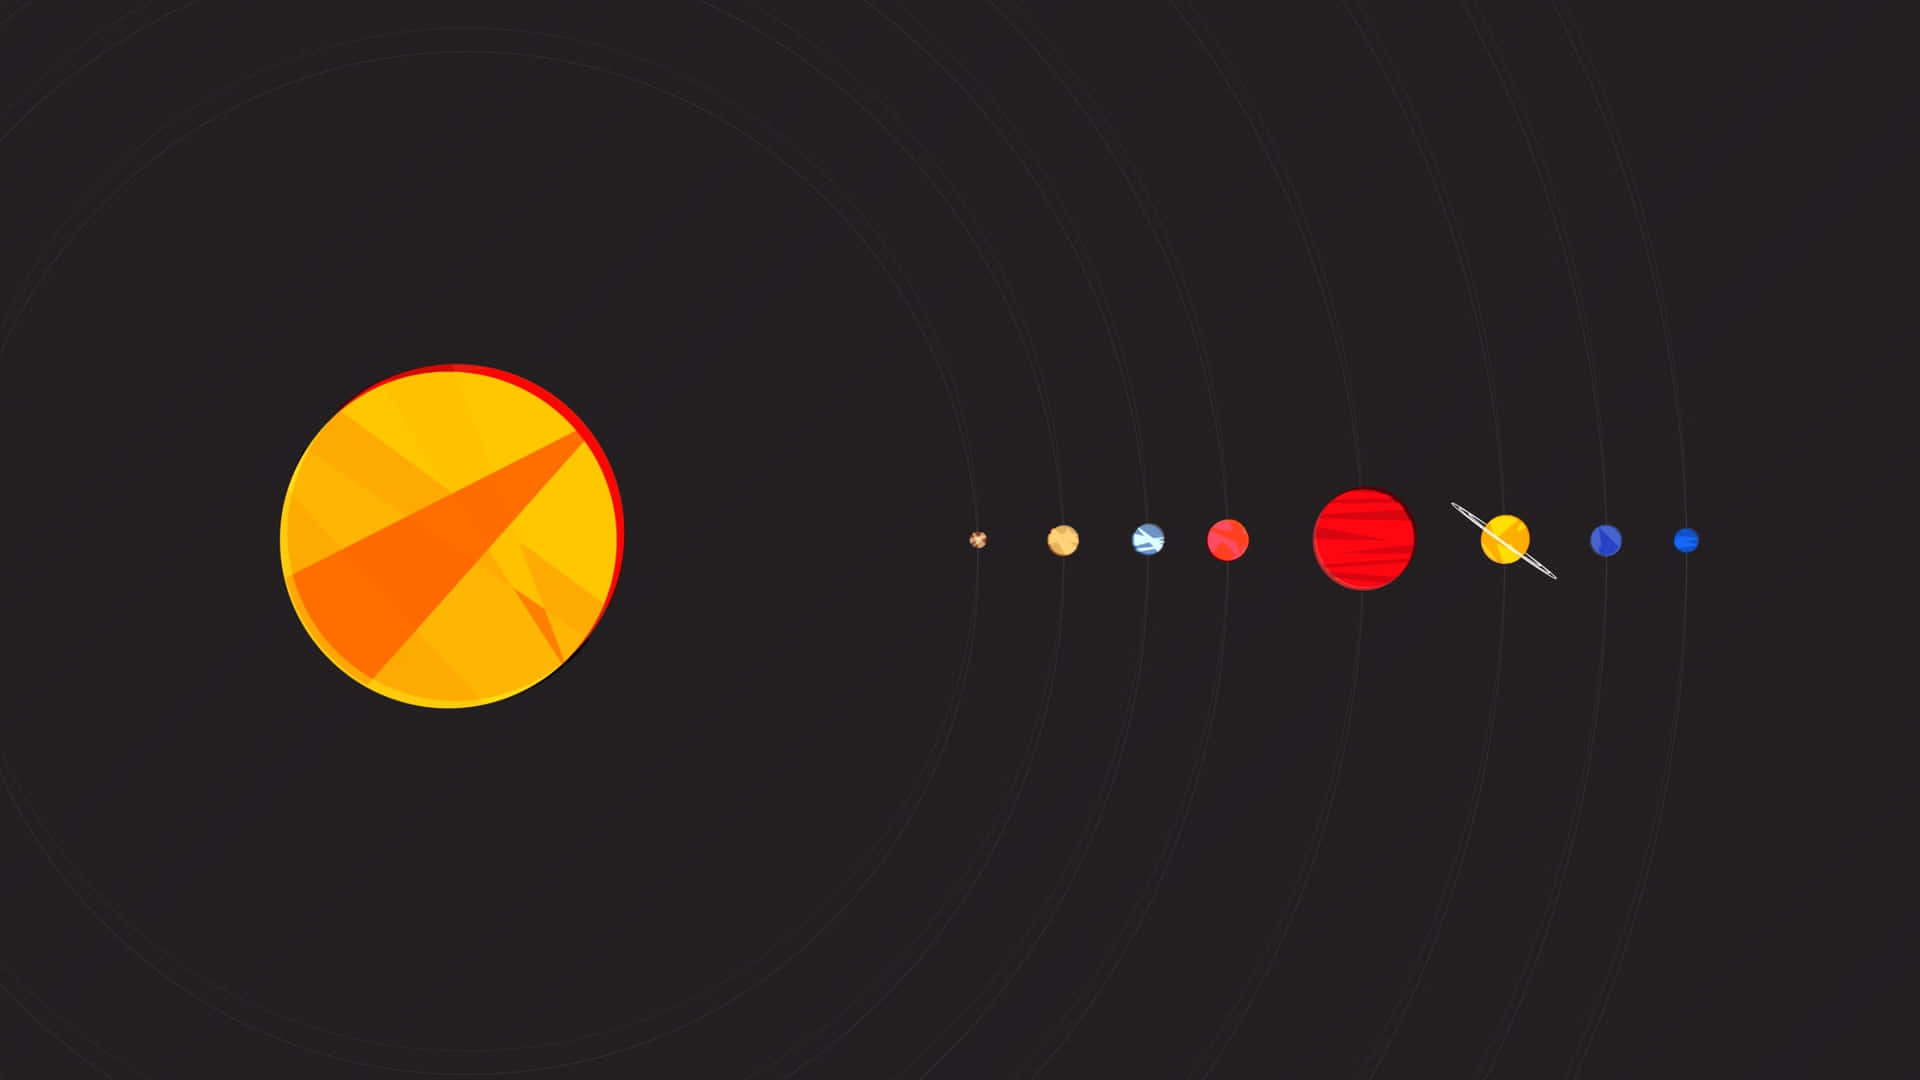 A Planet With A Sun And Other Planets